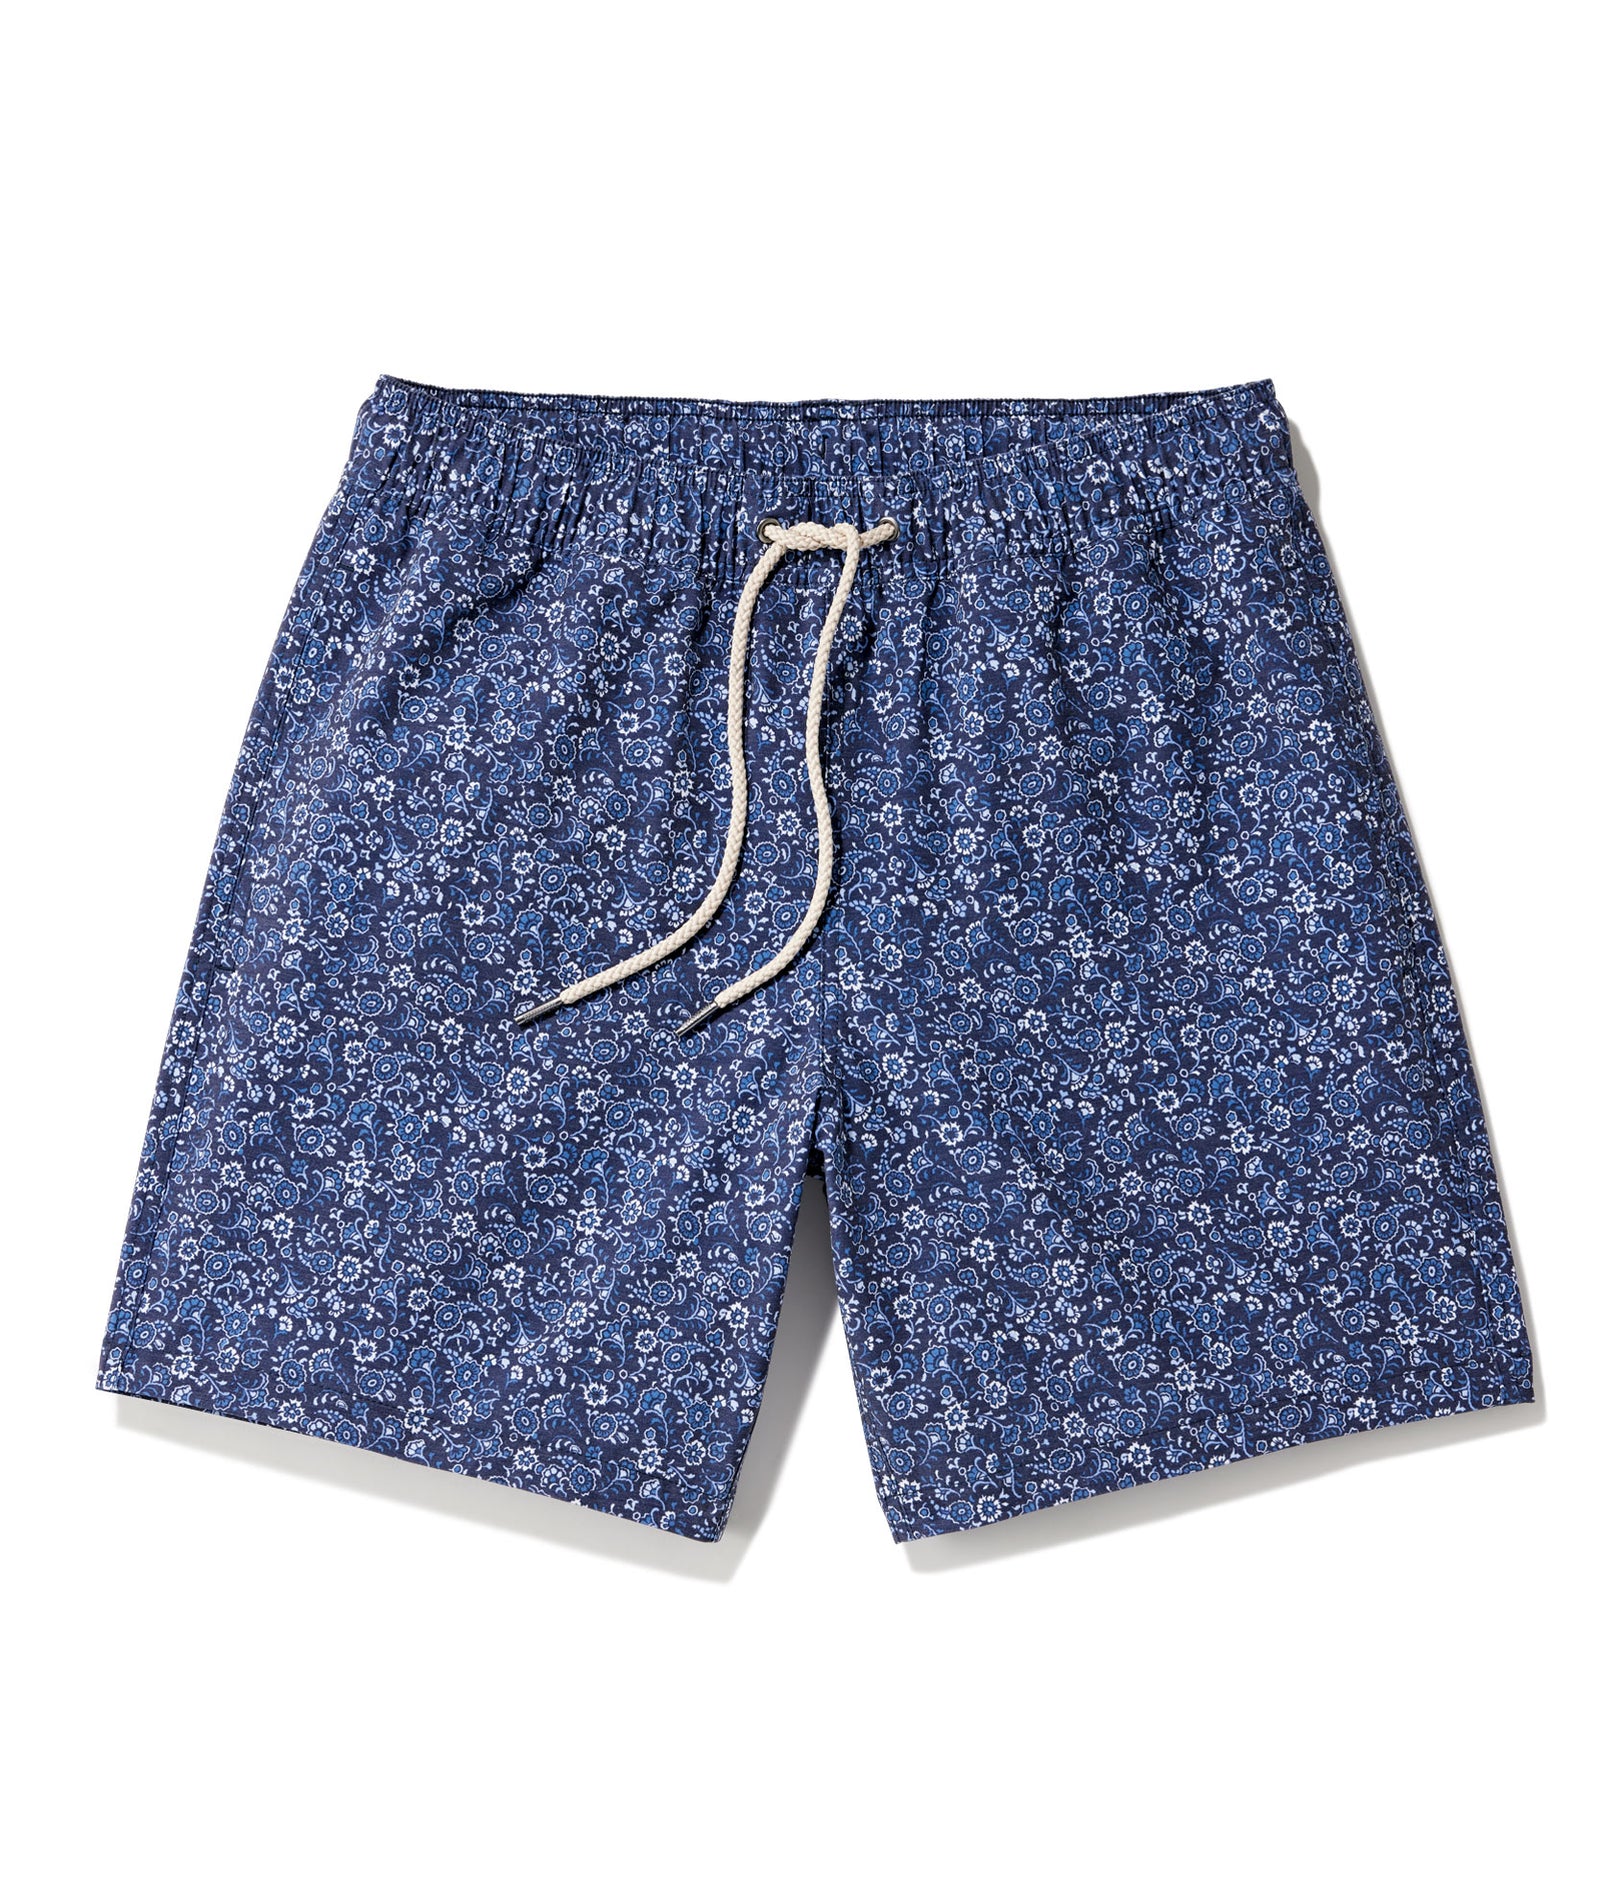 Limited Edition Bayberry Swim Trunks Blue Bandana Floral Print | UNTUCKit